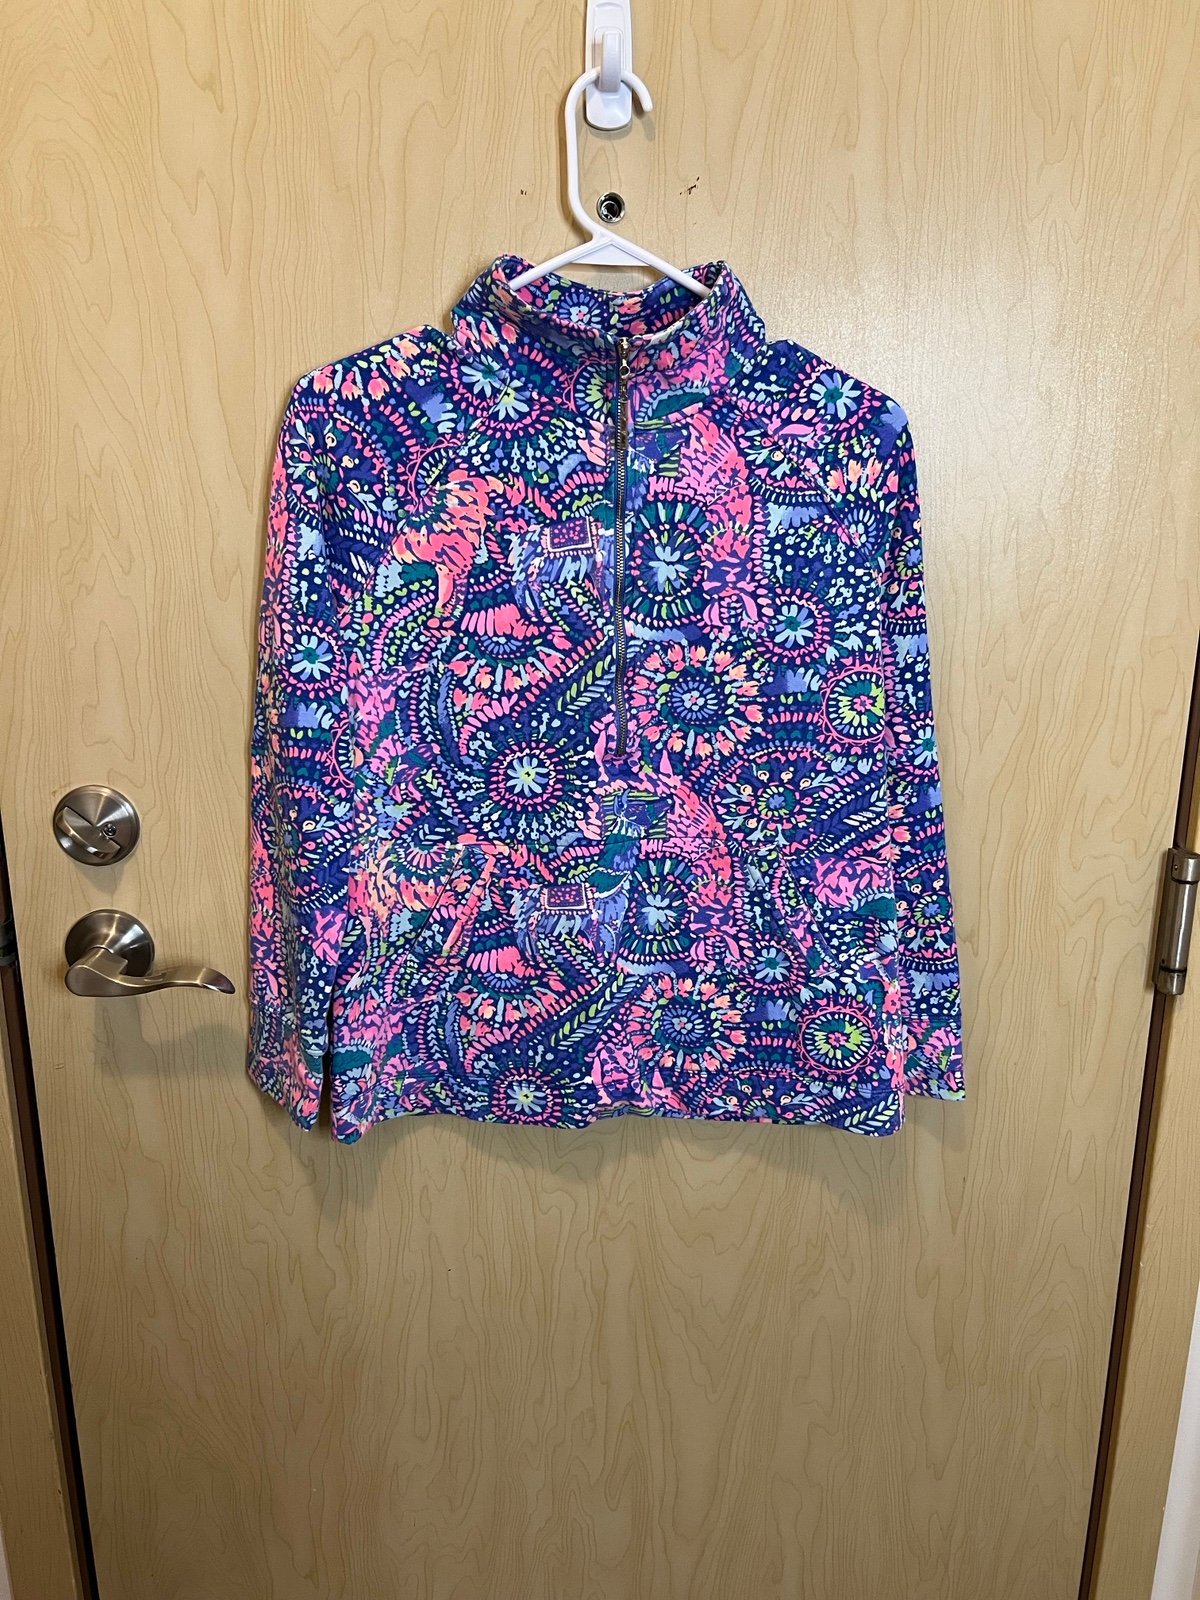 Cheap Lilly Pulitzer 1/2 zip fTY1NNz7D on sale